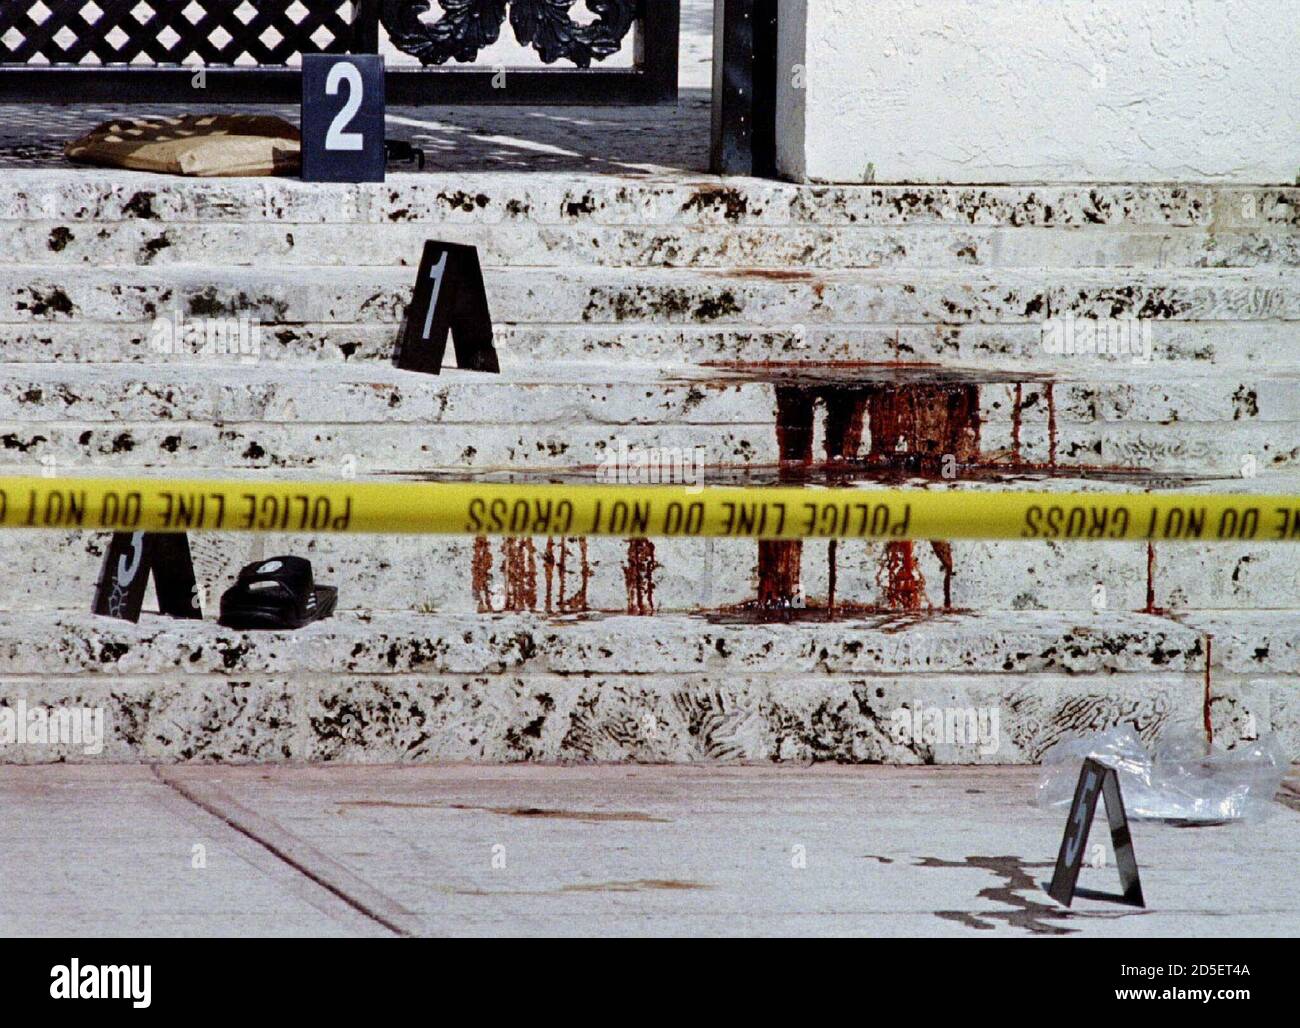 An Italian Newspaper In A Paper Bag 2 And A Slipper L Are Marked As Evidence In Front Of The Miami Beach Home Of Fashion Designer Gianni Versace 50 Who Was Murdered